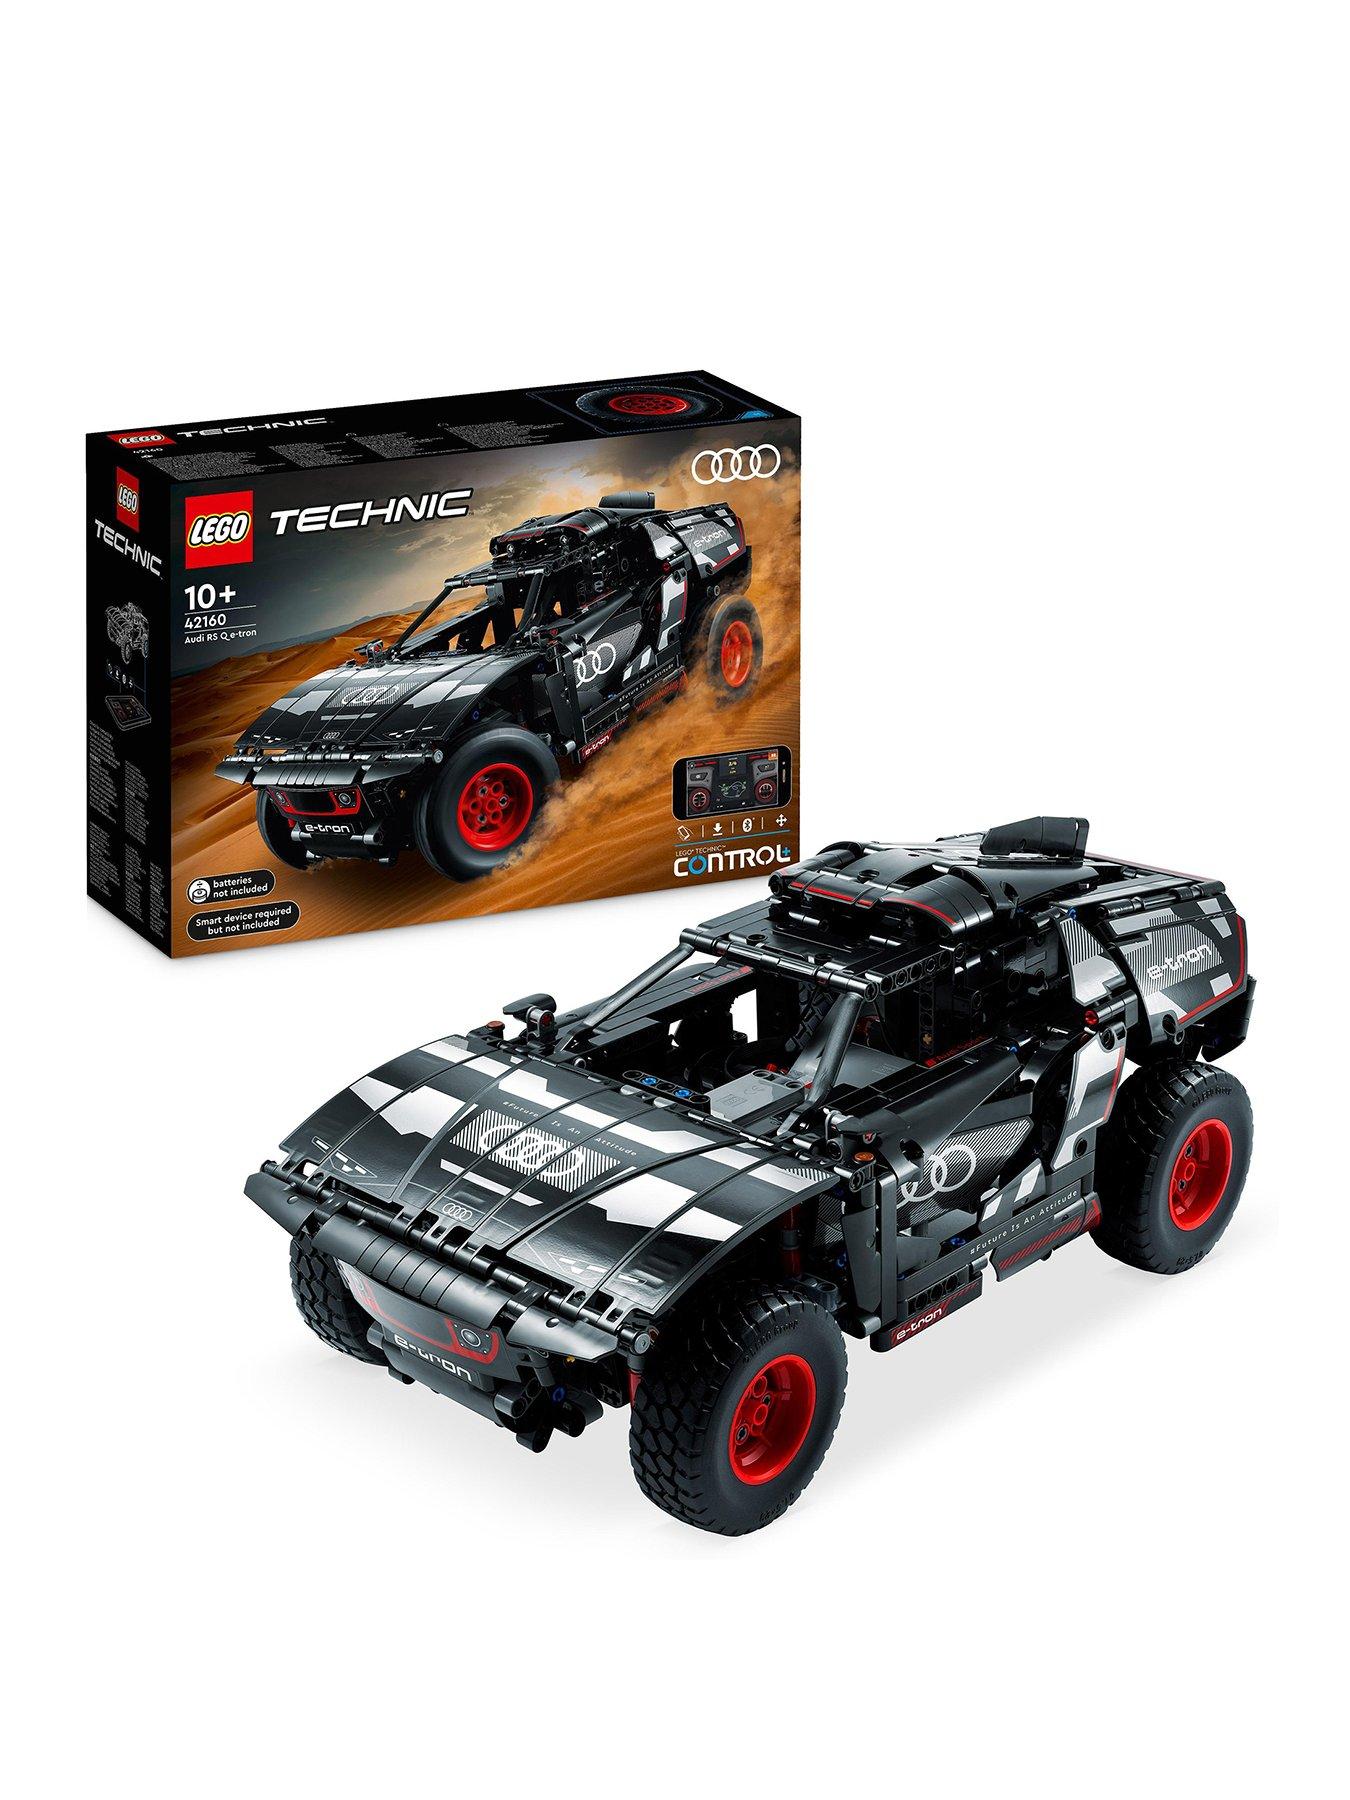 Peugeot 9X8 By Lego Technic Brings Le Mans Race Car To Your Table